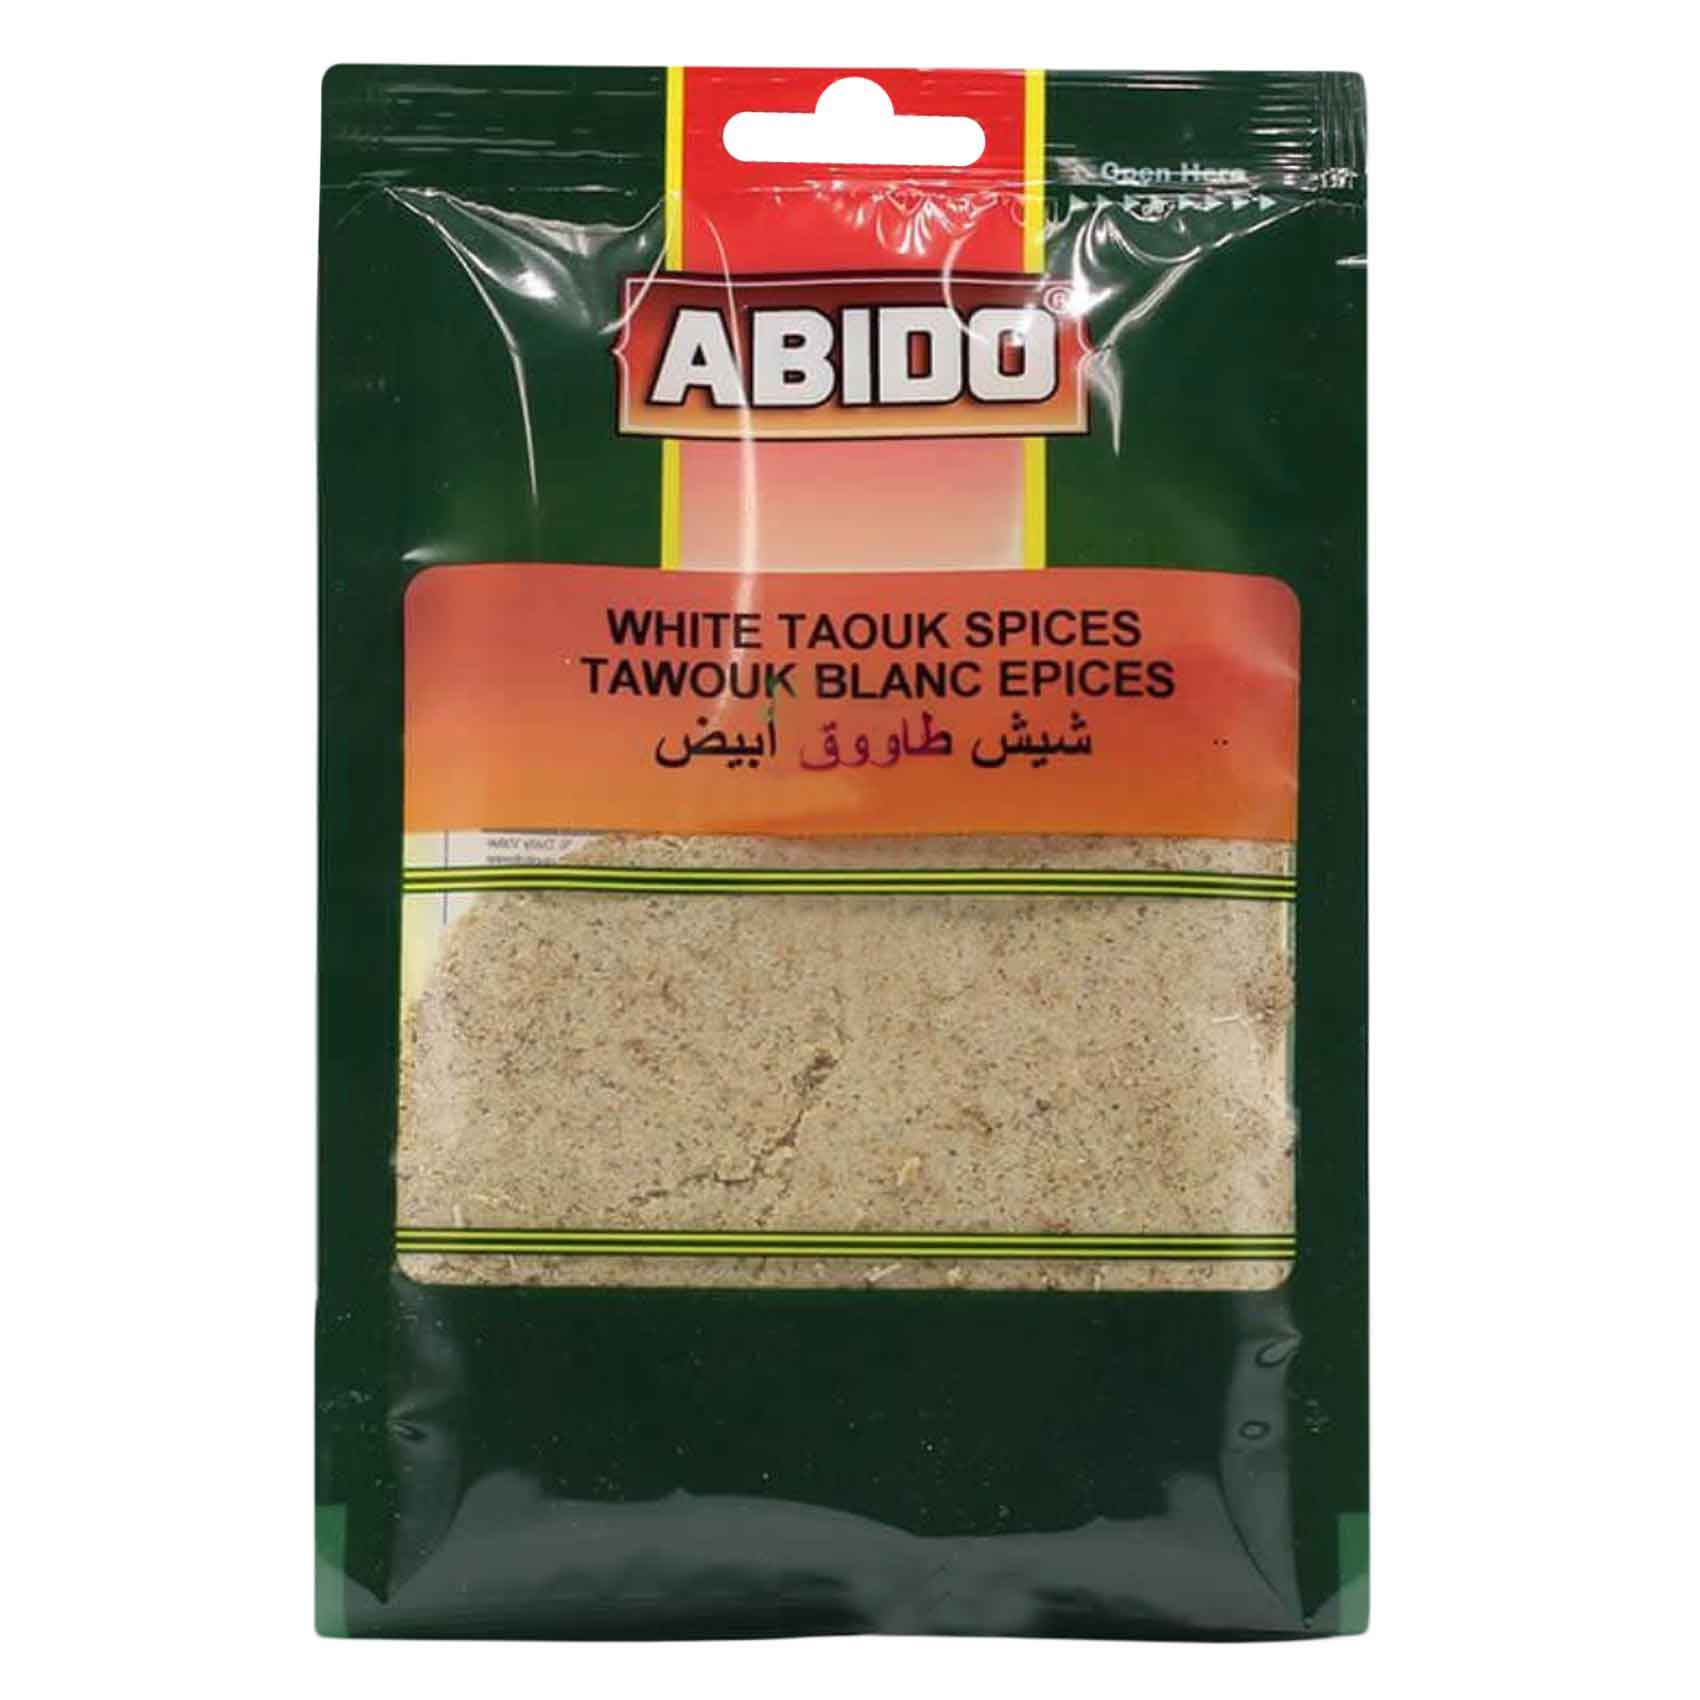 Abido Spice Grinded Tawook Spices 90g